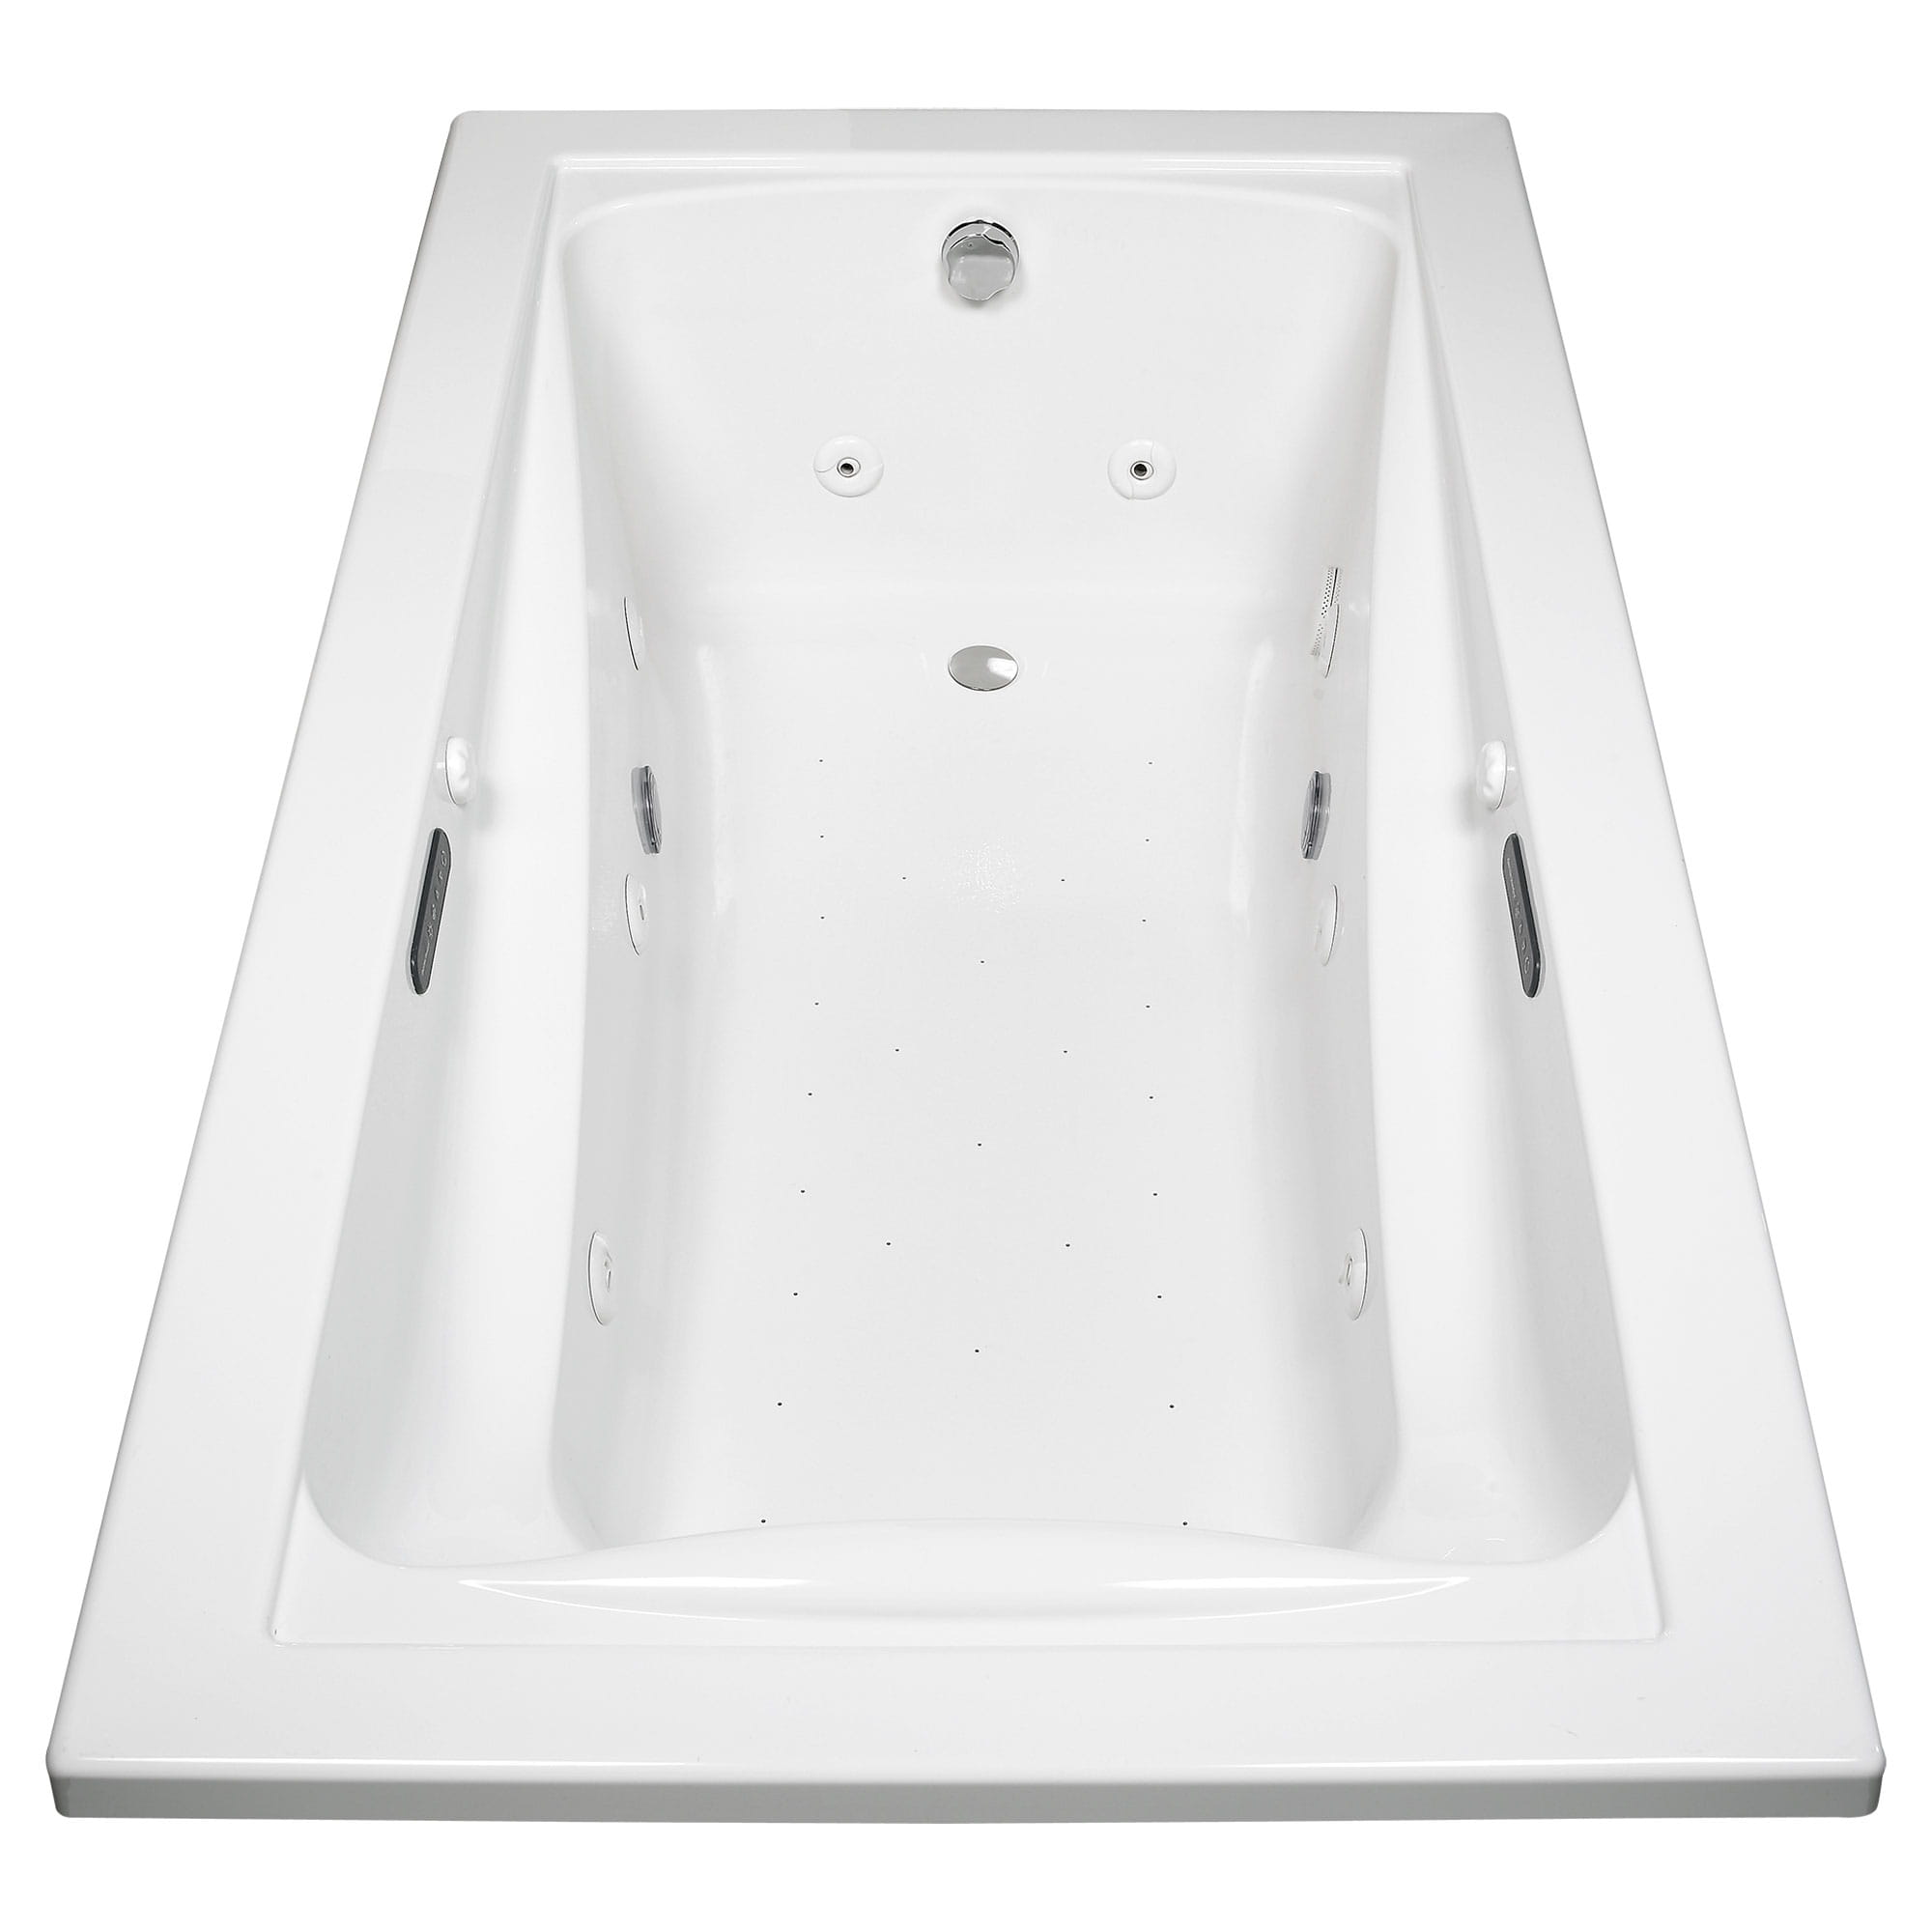 Green Tea 72 x 42 Inch Drop In Bathtub With EcoSilent EverClean Combination Spa System WHITE